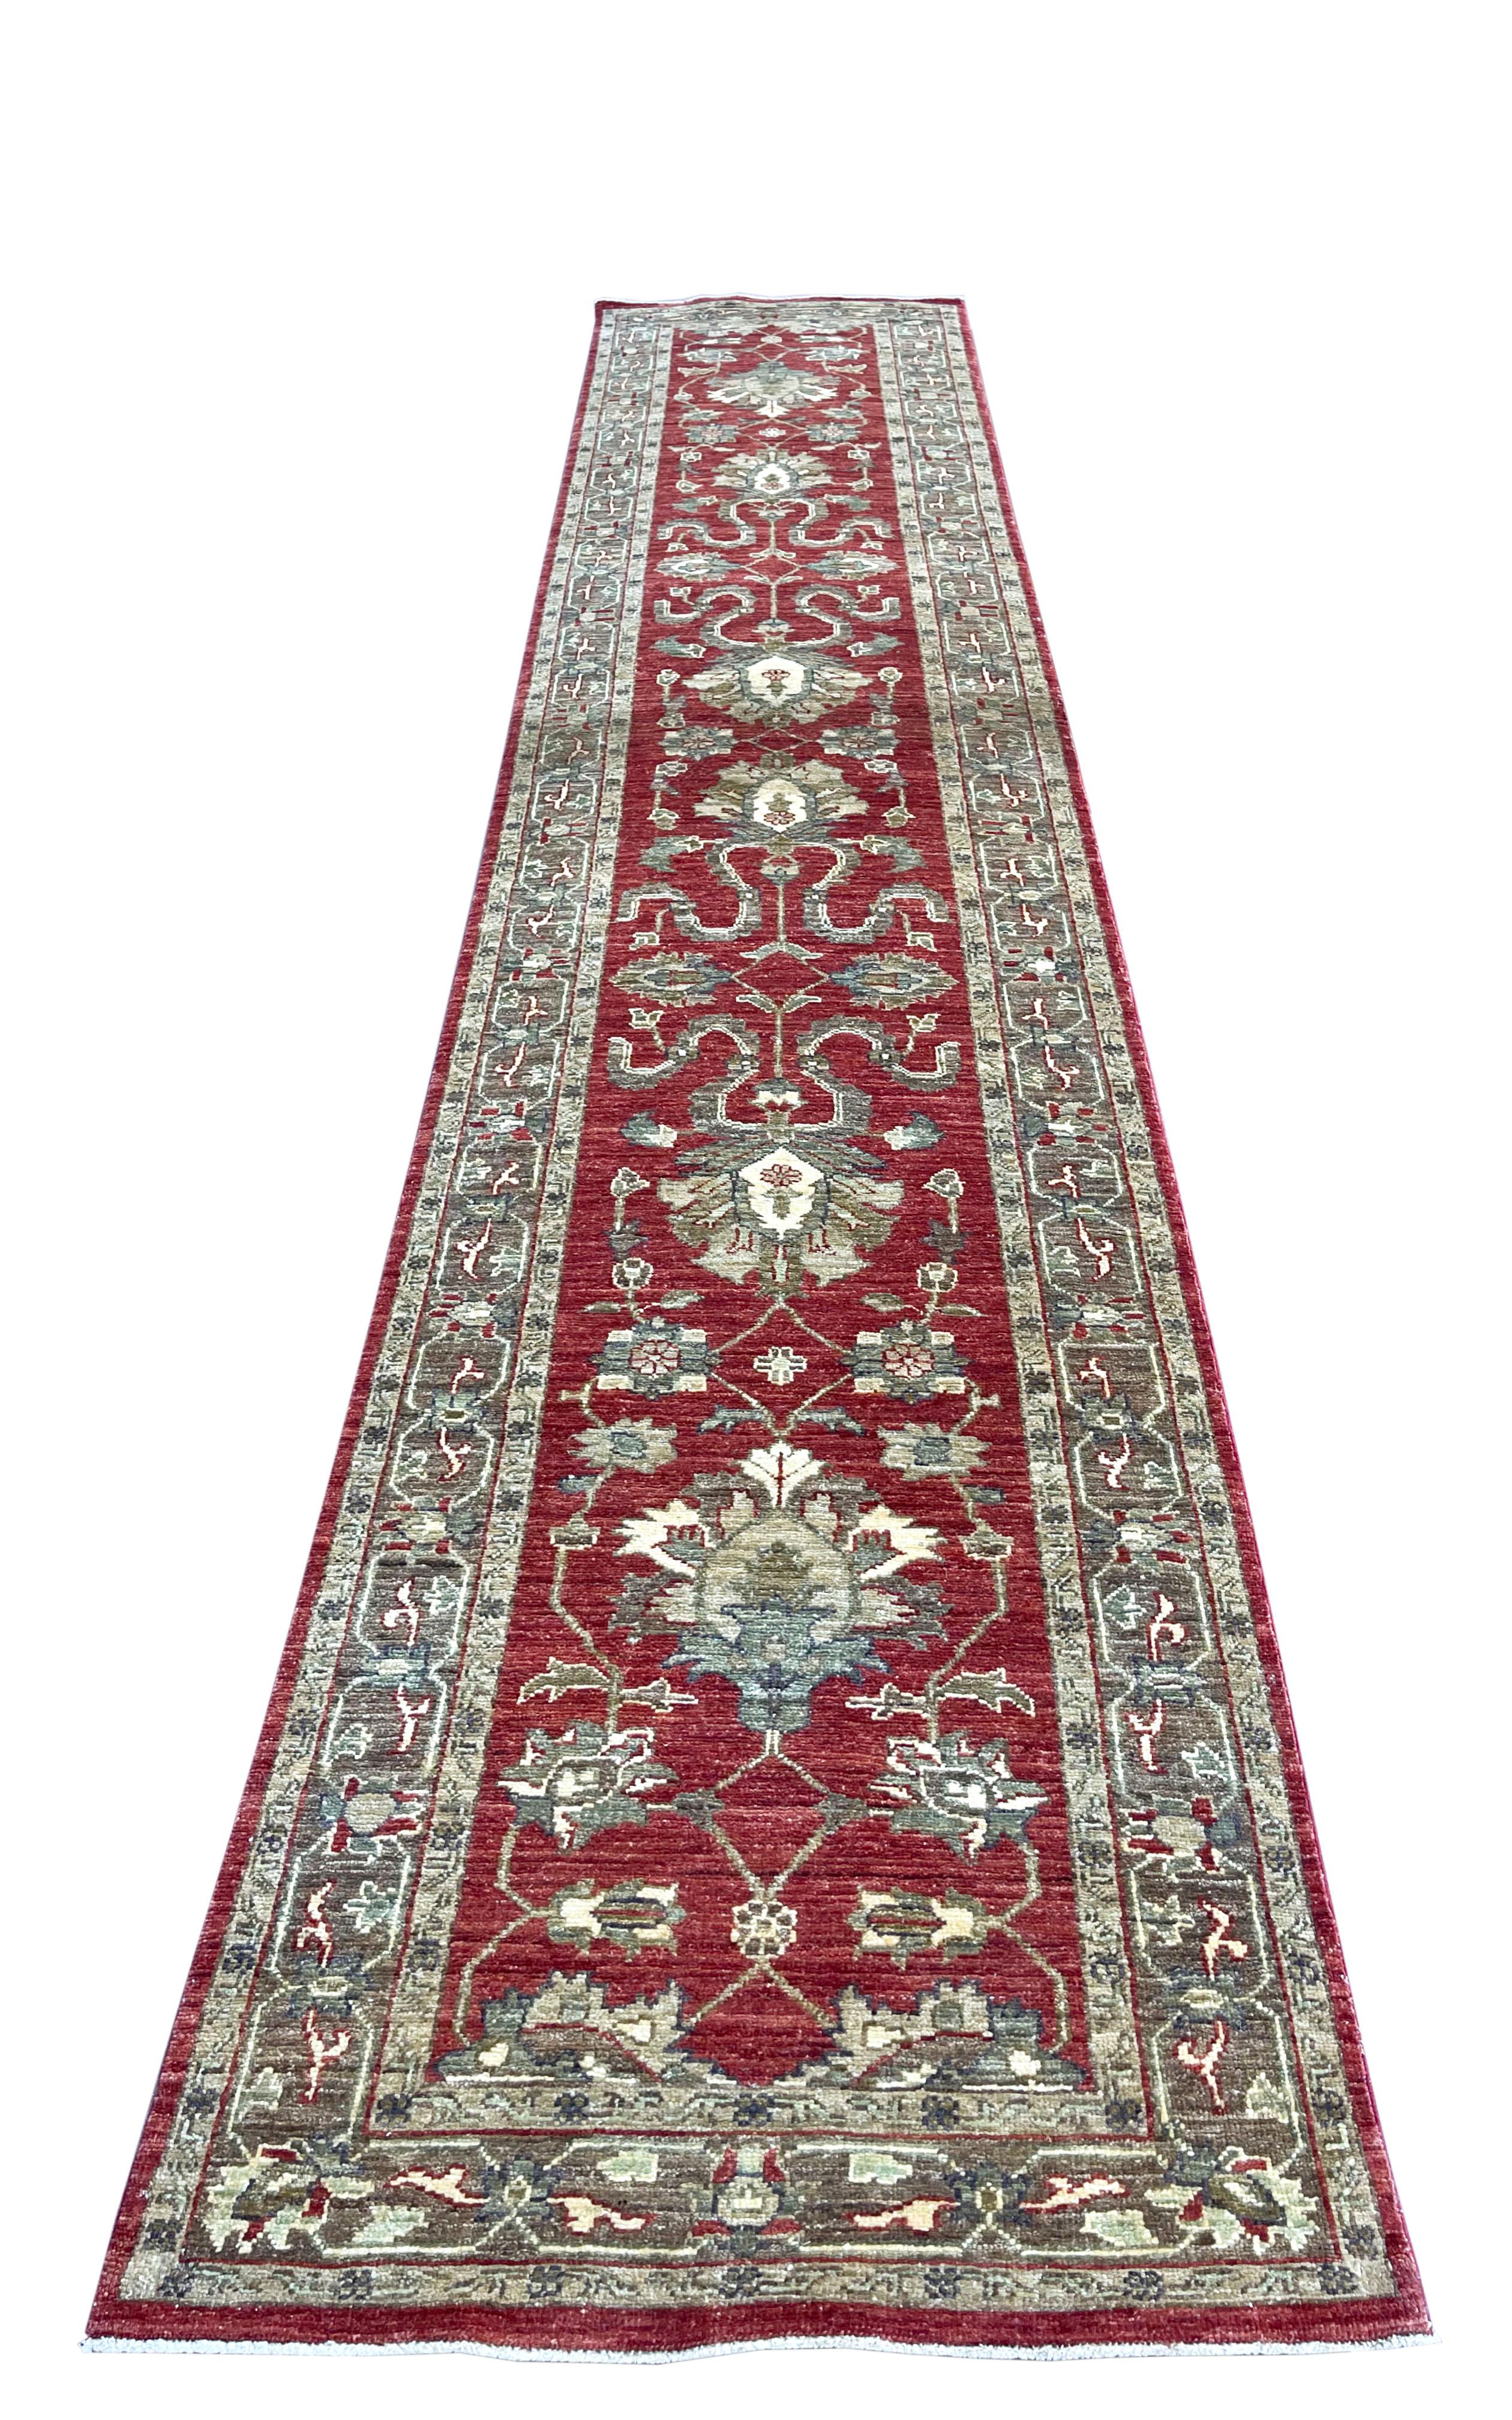 This Peshawar Pakistan rug is a fine knotted with a wool pile and cotton weft. The base color is dark orange and the border is brown. The Peshawar rugs are in high demand across the market because their design, quality and color combination. The